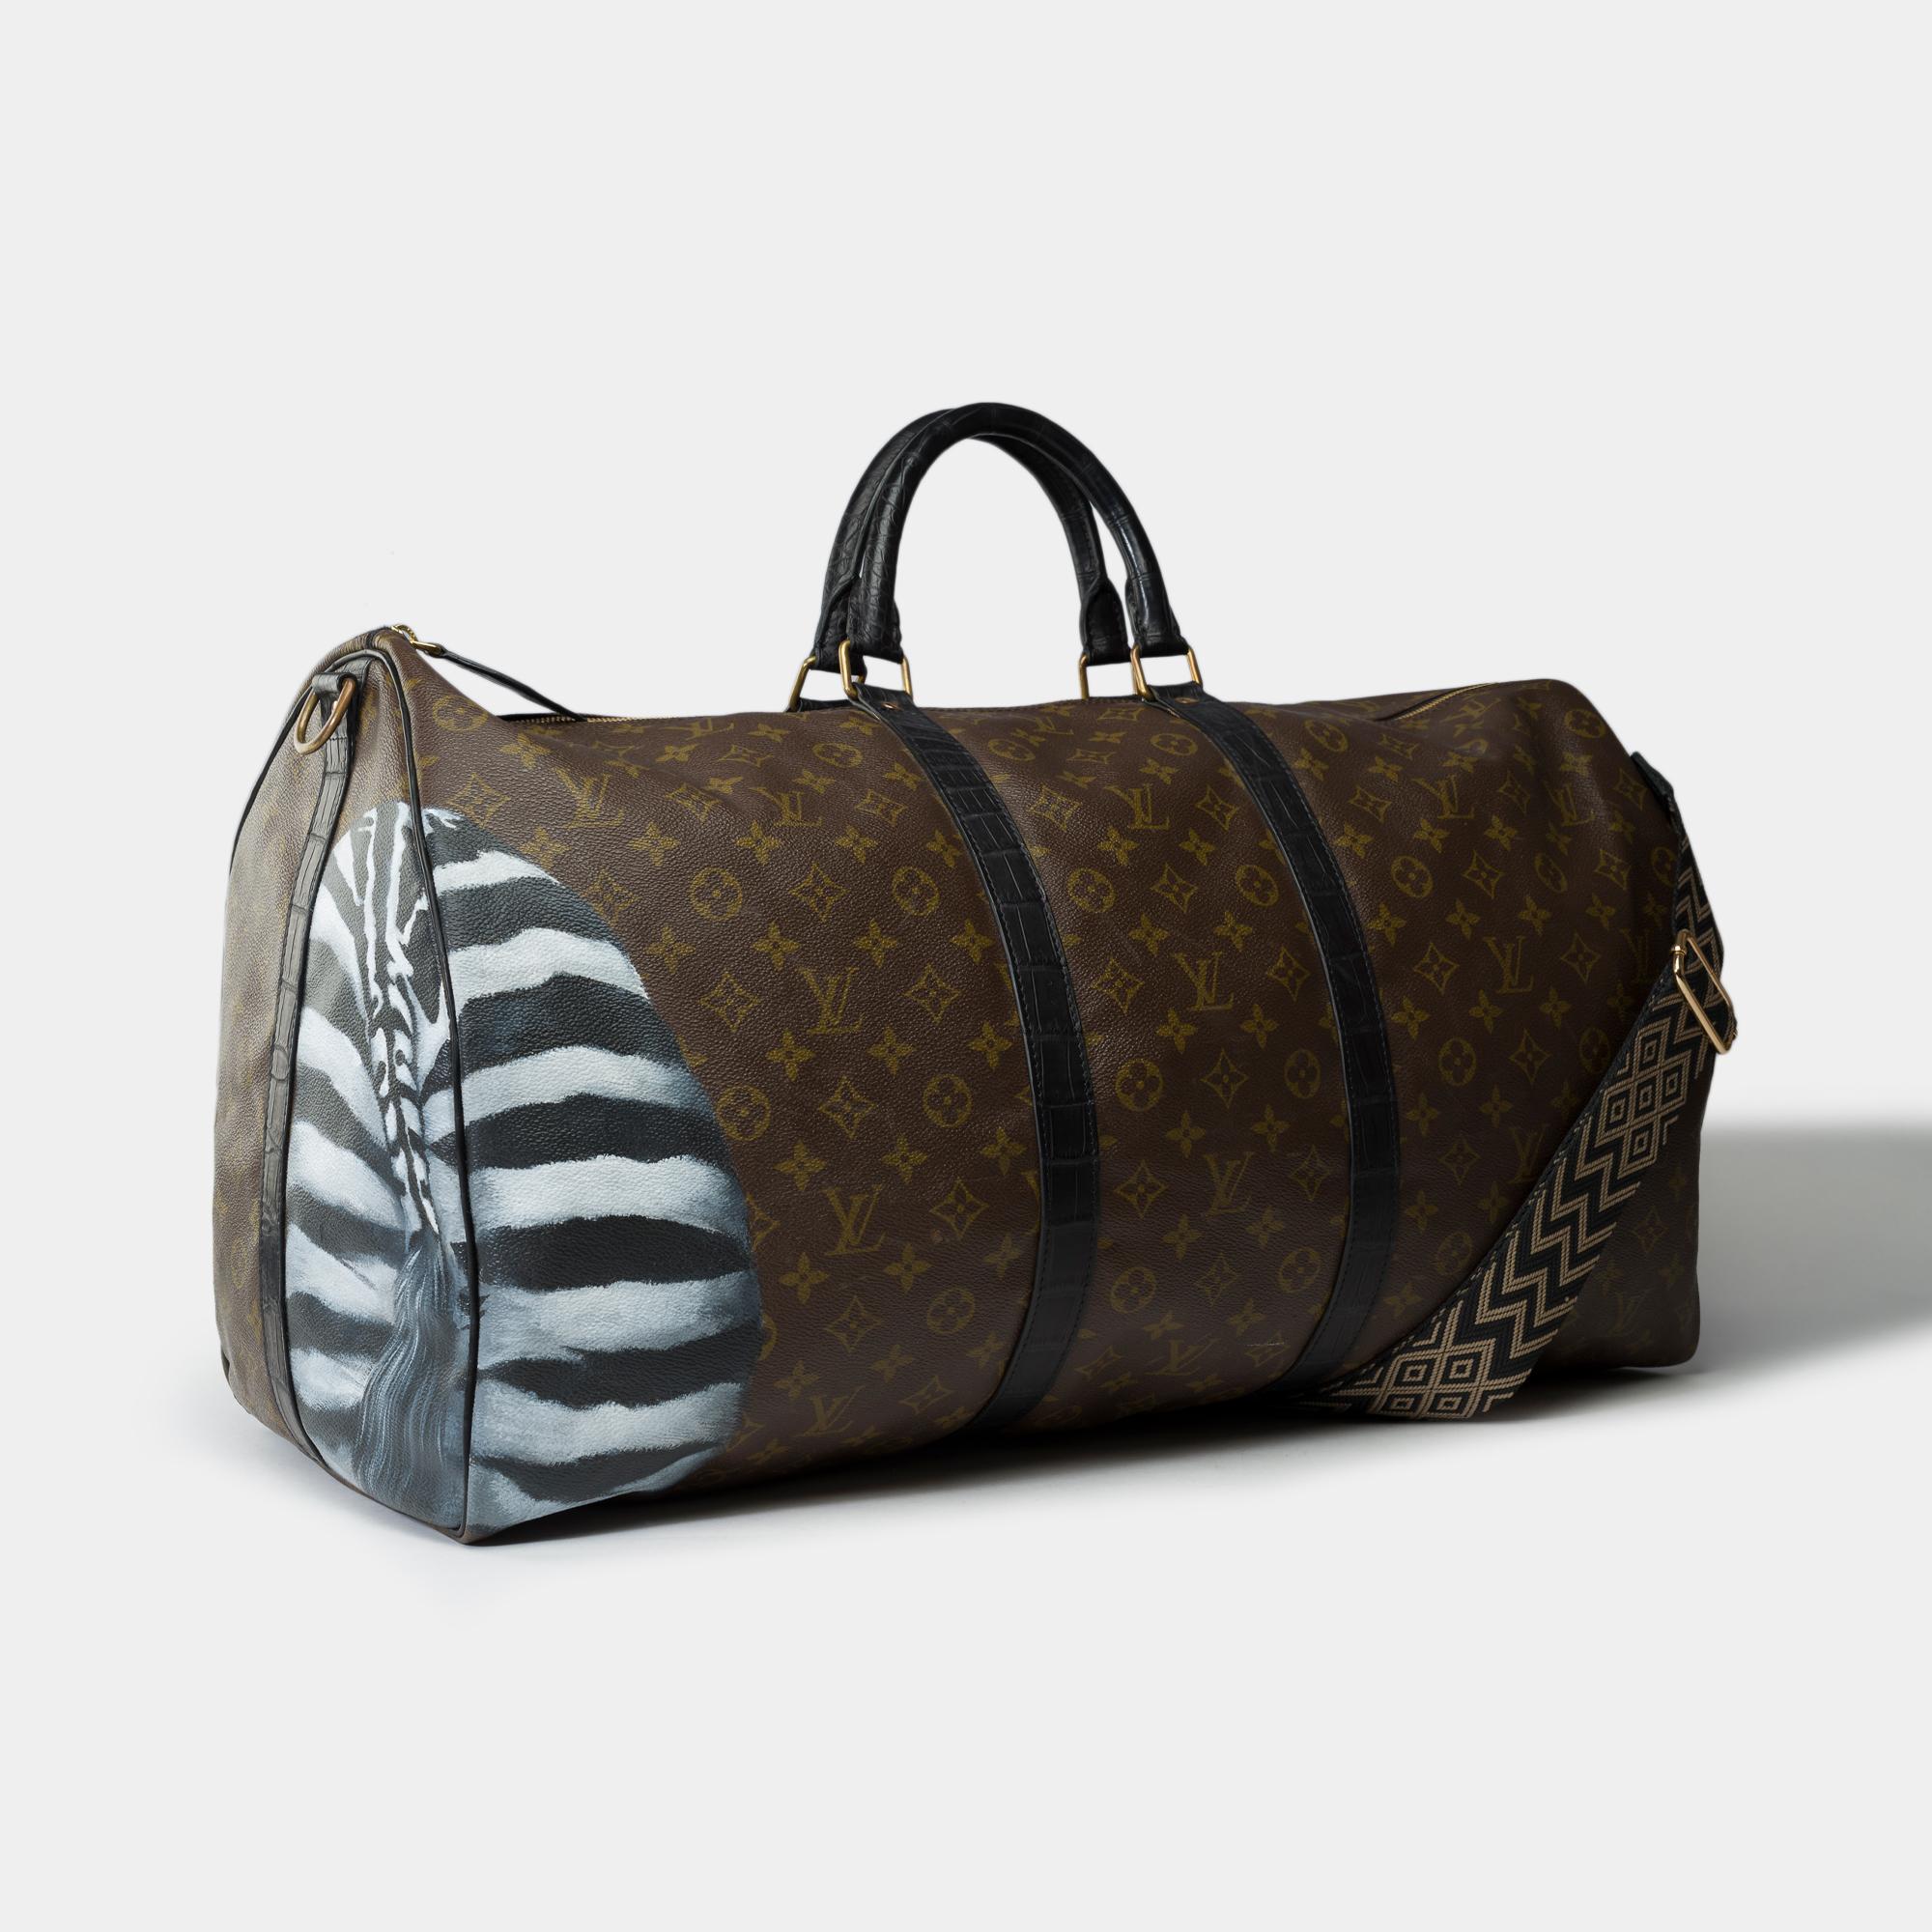 Exceptional​ ​and​ ​Unique​ ​Louis​ ​Vuitton​ ​Keepall​ ​60​ ​Macassar​ ​in​ ​brown​ ​monogram​ ​coated​ ​canvas​ ​zebra-patterned​ ​customized​ ​with​ ​genuine​ ​black​ ​Crocodile​ ​Porosus​ ​leather,​ ​black​ ​crococdile​ ​to​ ​the​ ​handles​ ​on​